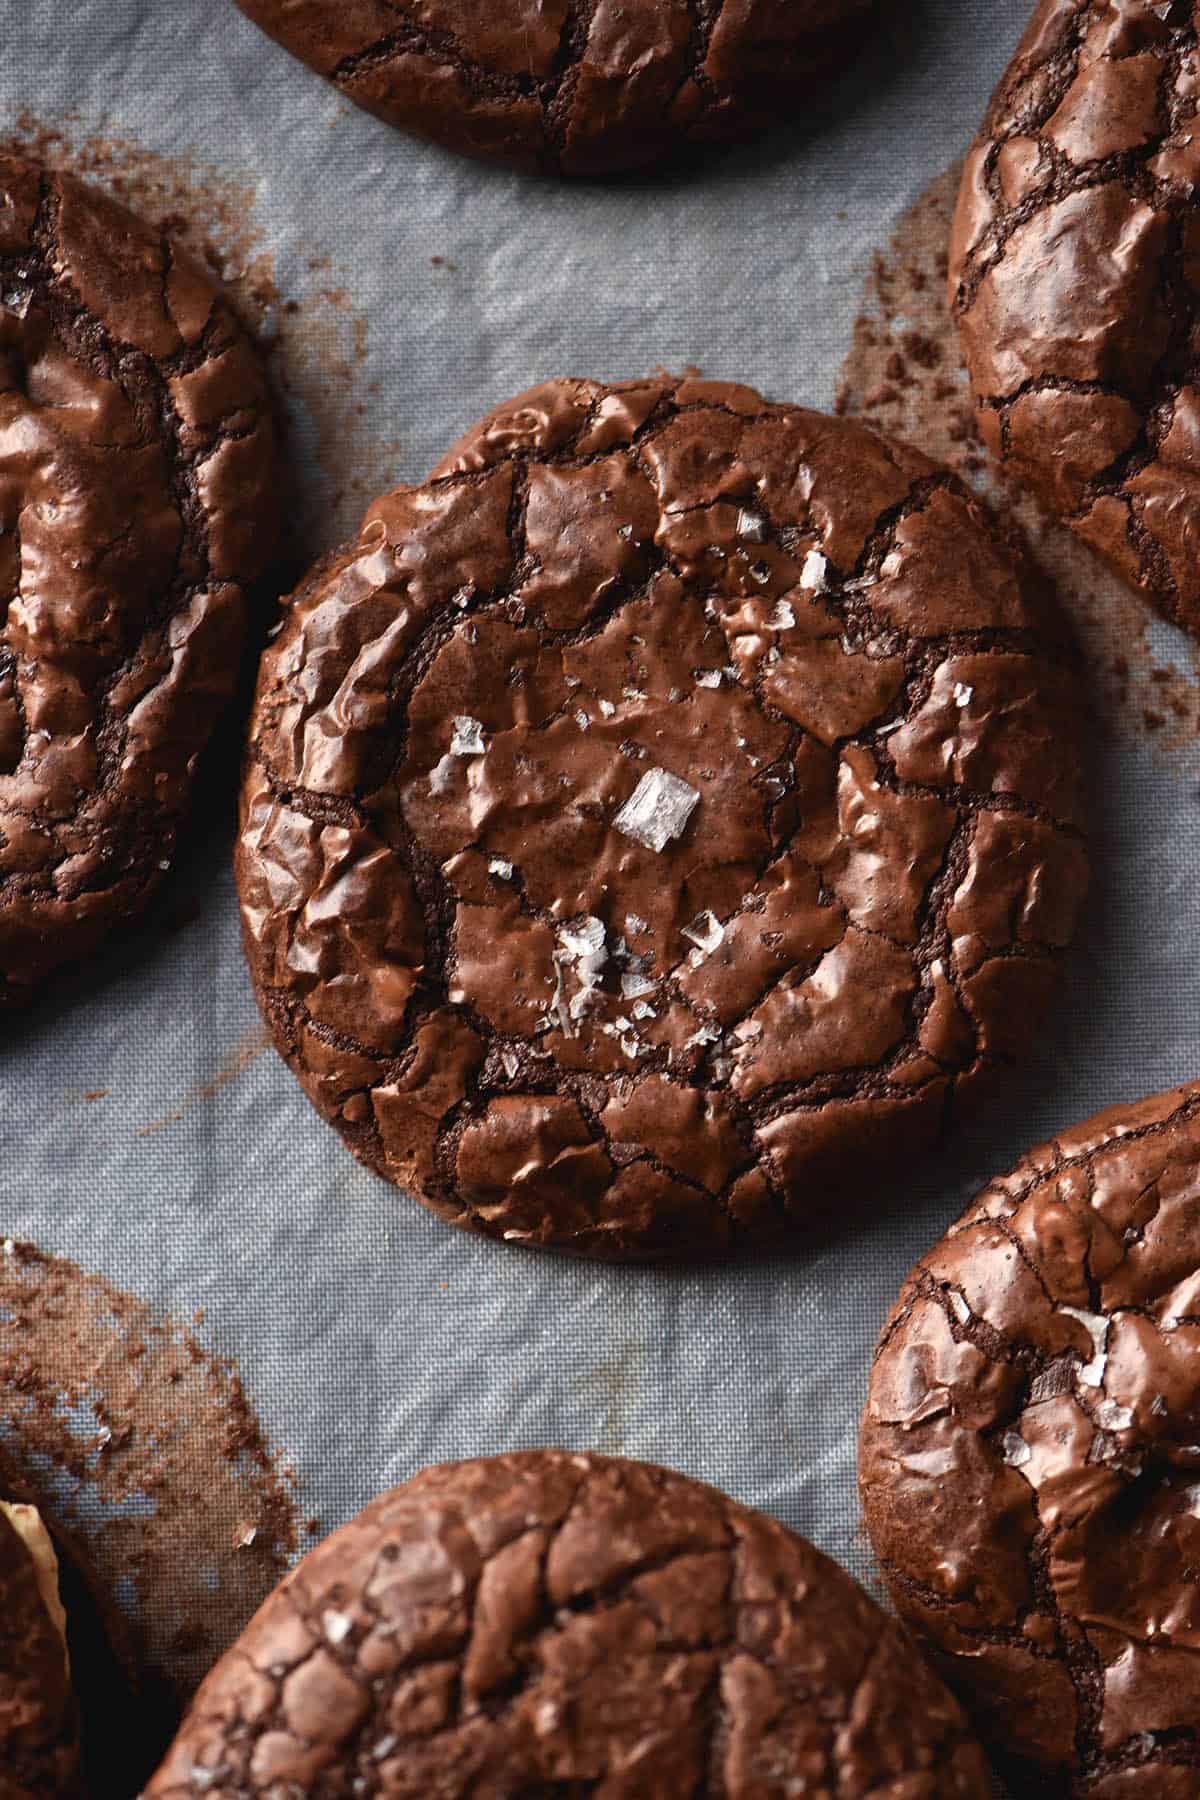 An aerial view of gluten free brownie cookies sitting atop a parchment lined baking sheet. The brownie cookies have been sprinkled with sea salt flakes that contrast against the shiny, crackled surface of the cookies.